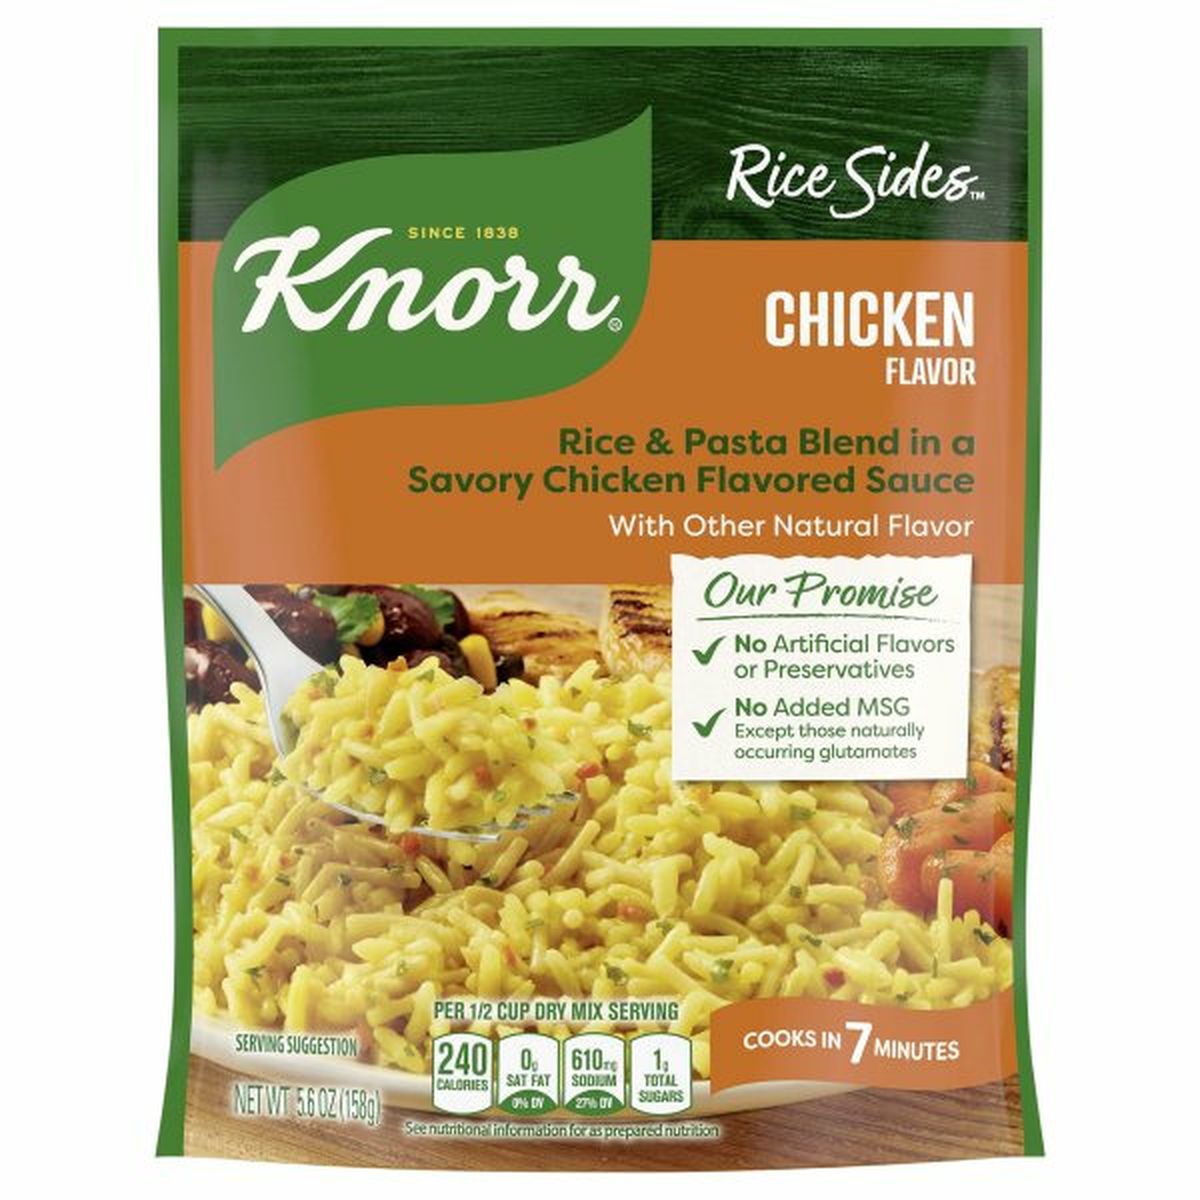 Calories in Knorr Rice Sides, Chicken Flavor